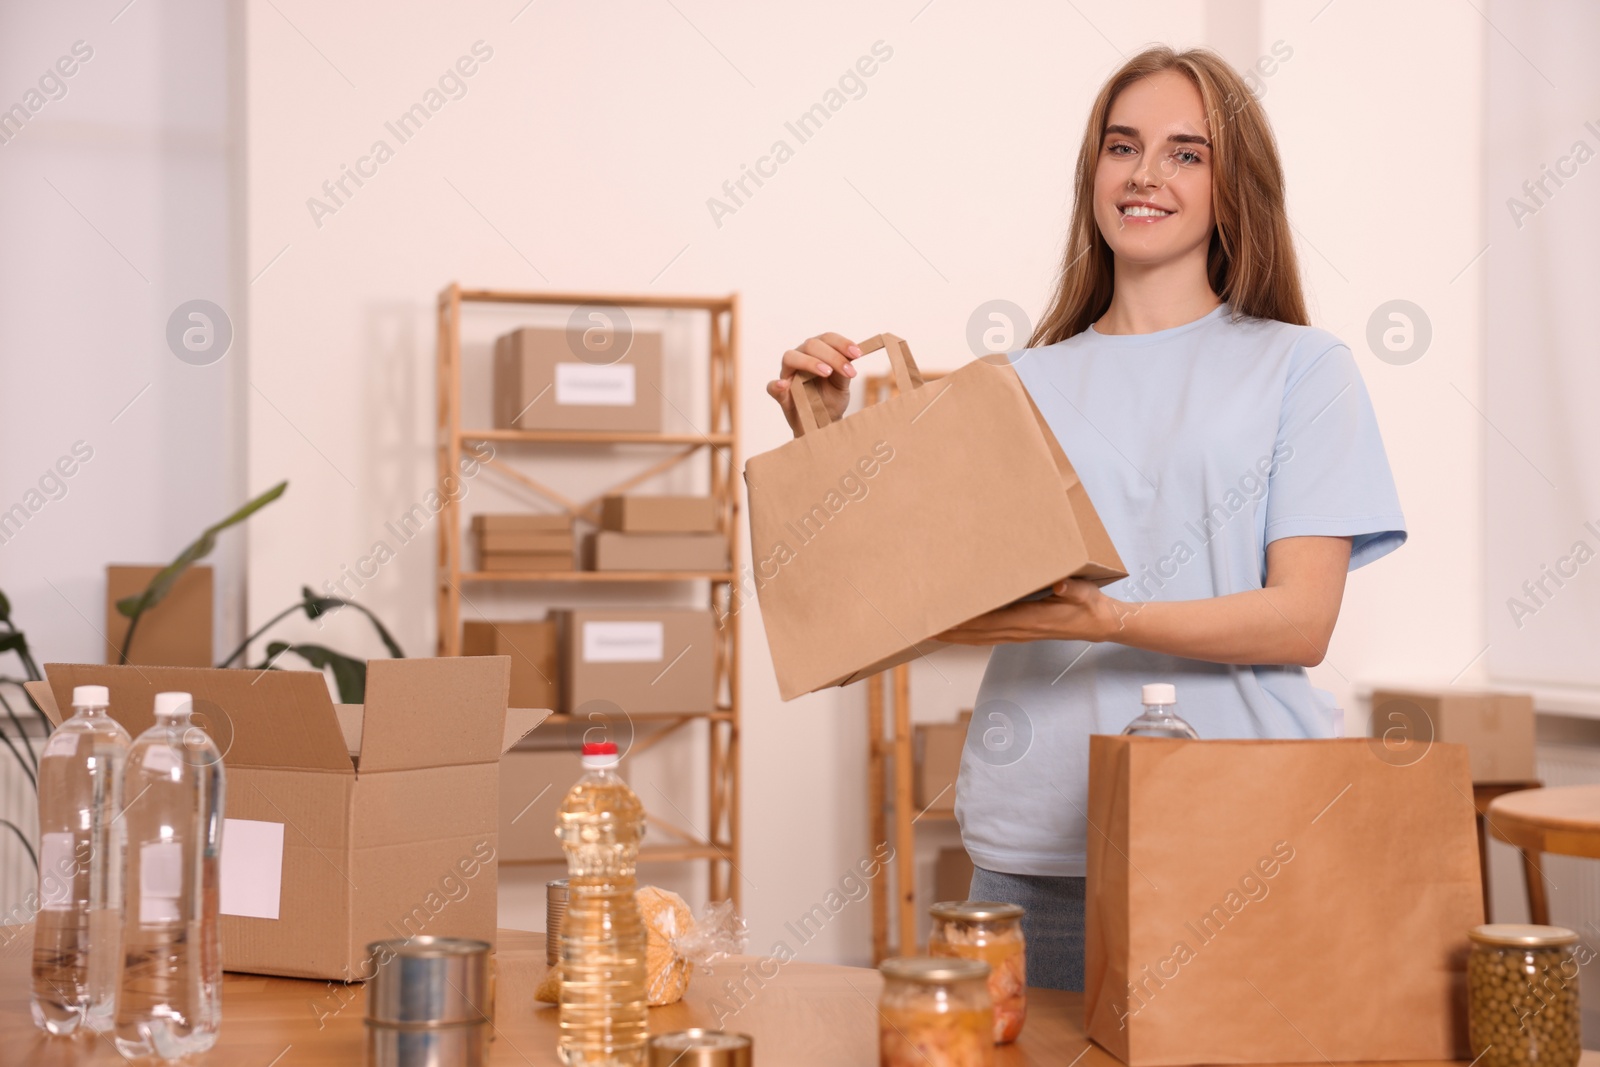 Photo of Volunteer with paper bag and food products on table in warehouse